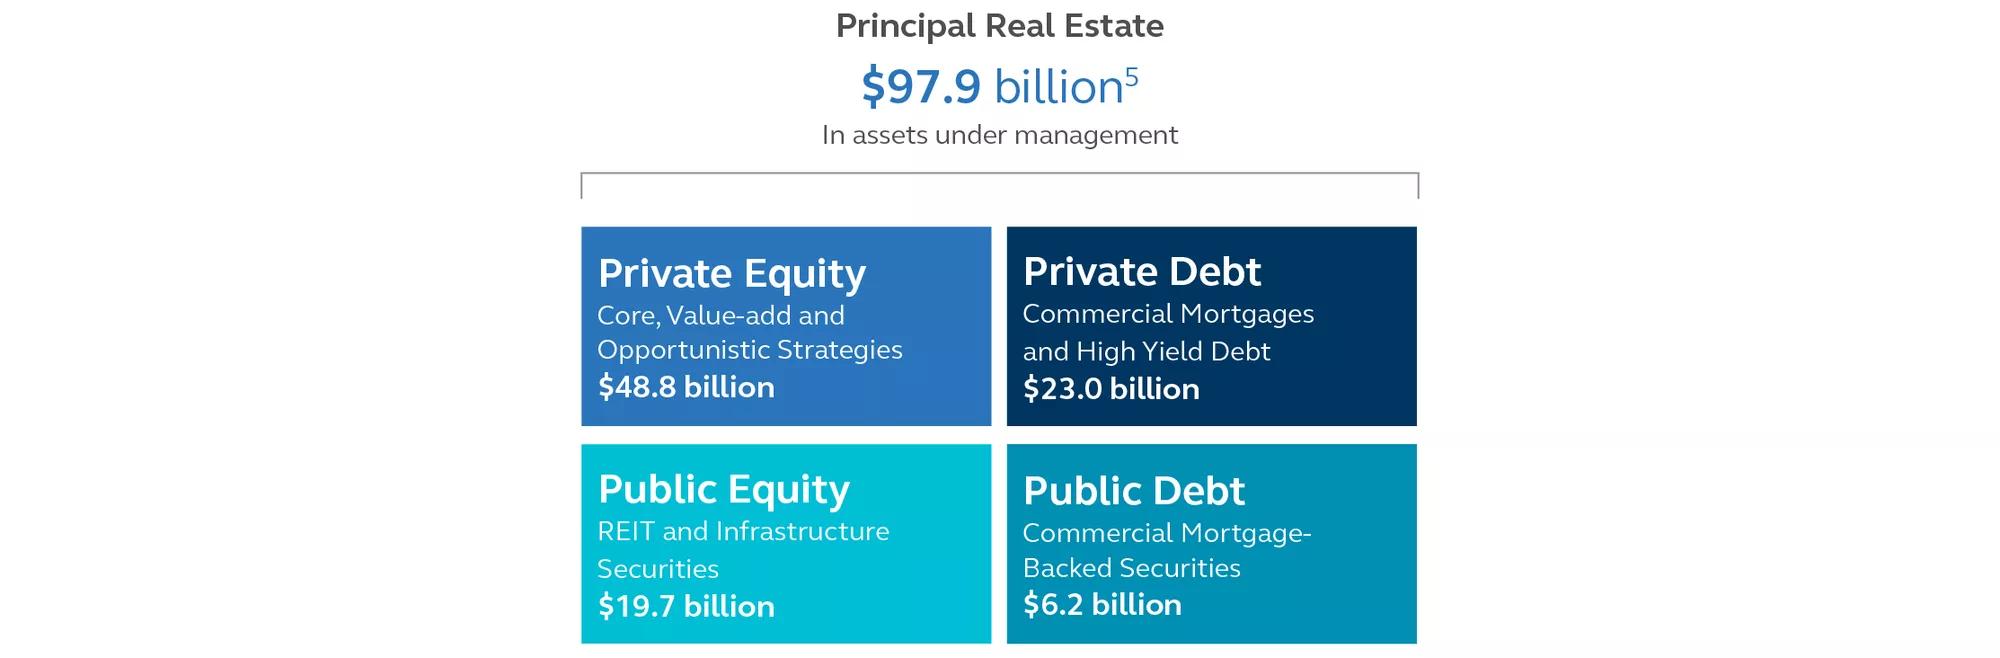 Infographic of Principal Real Estate's assets under management and their sector breakdown